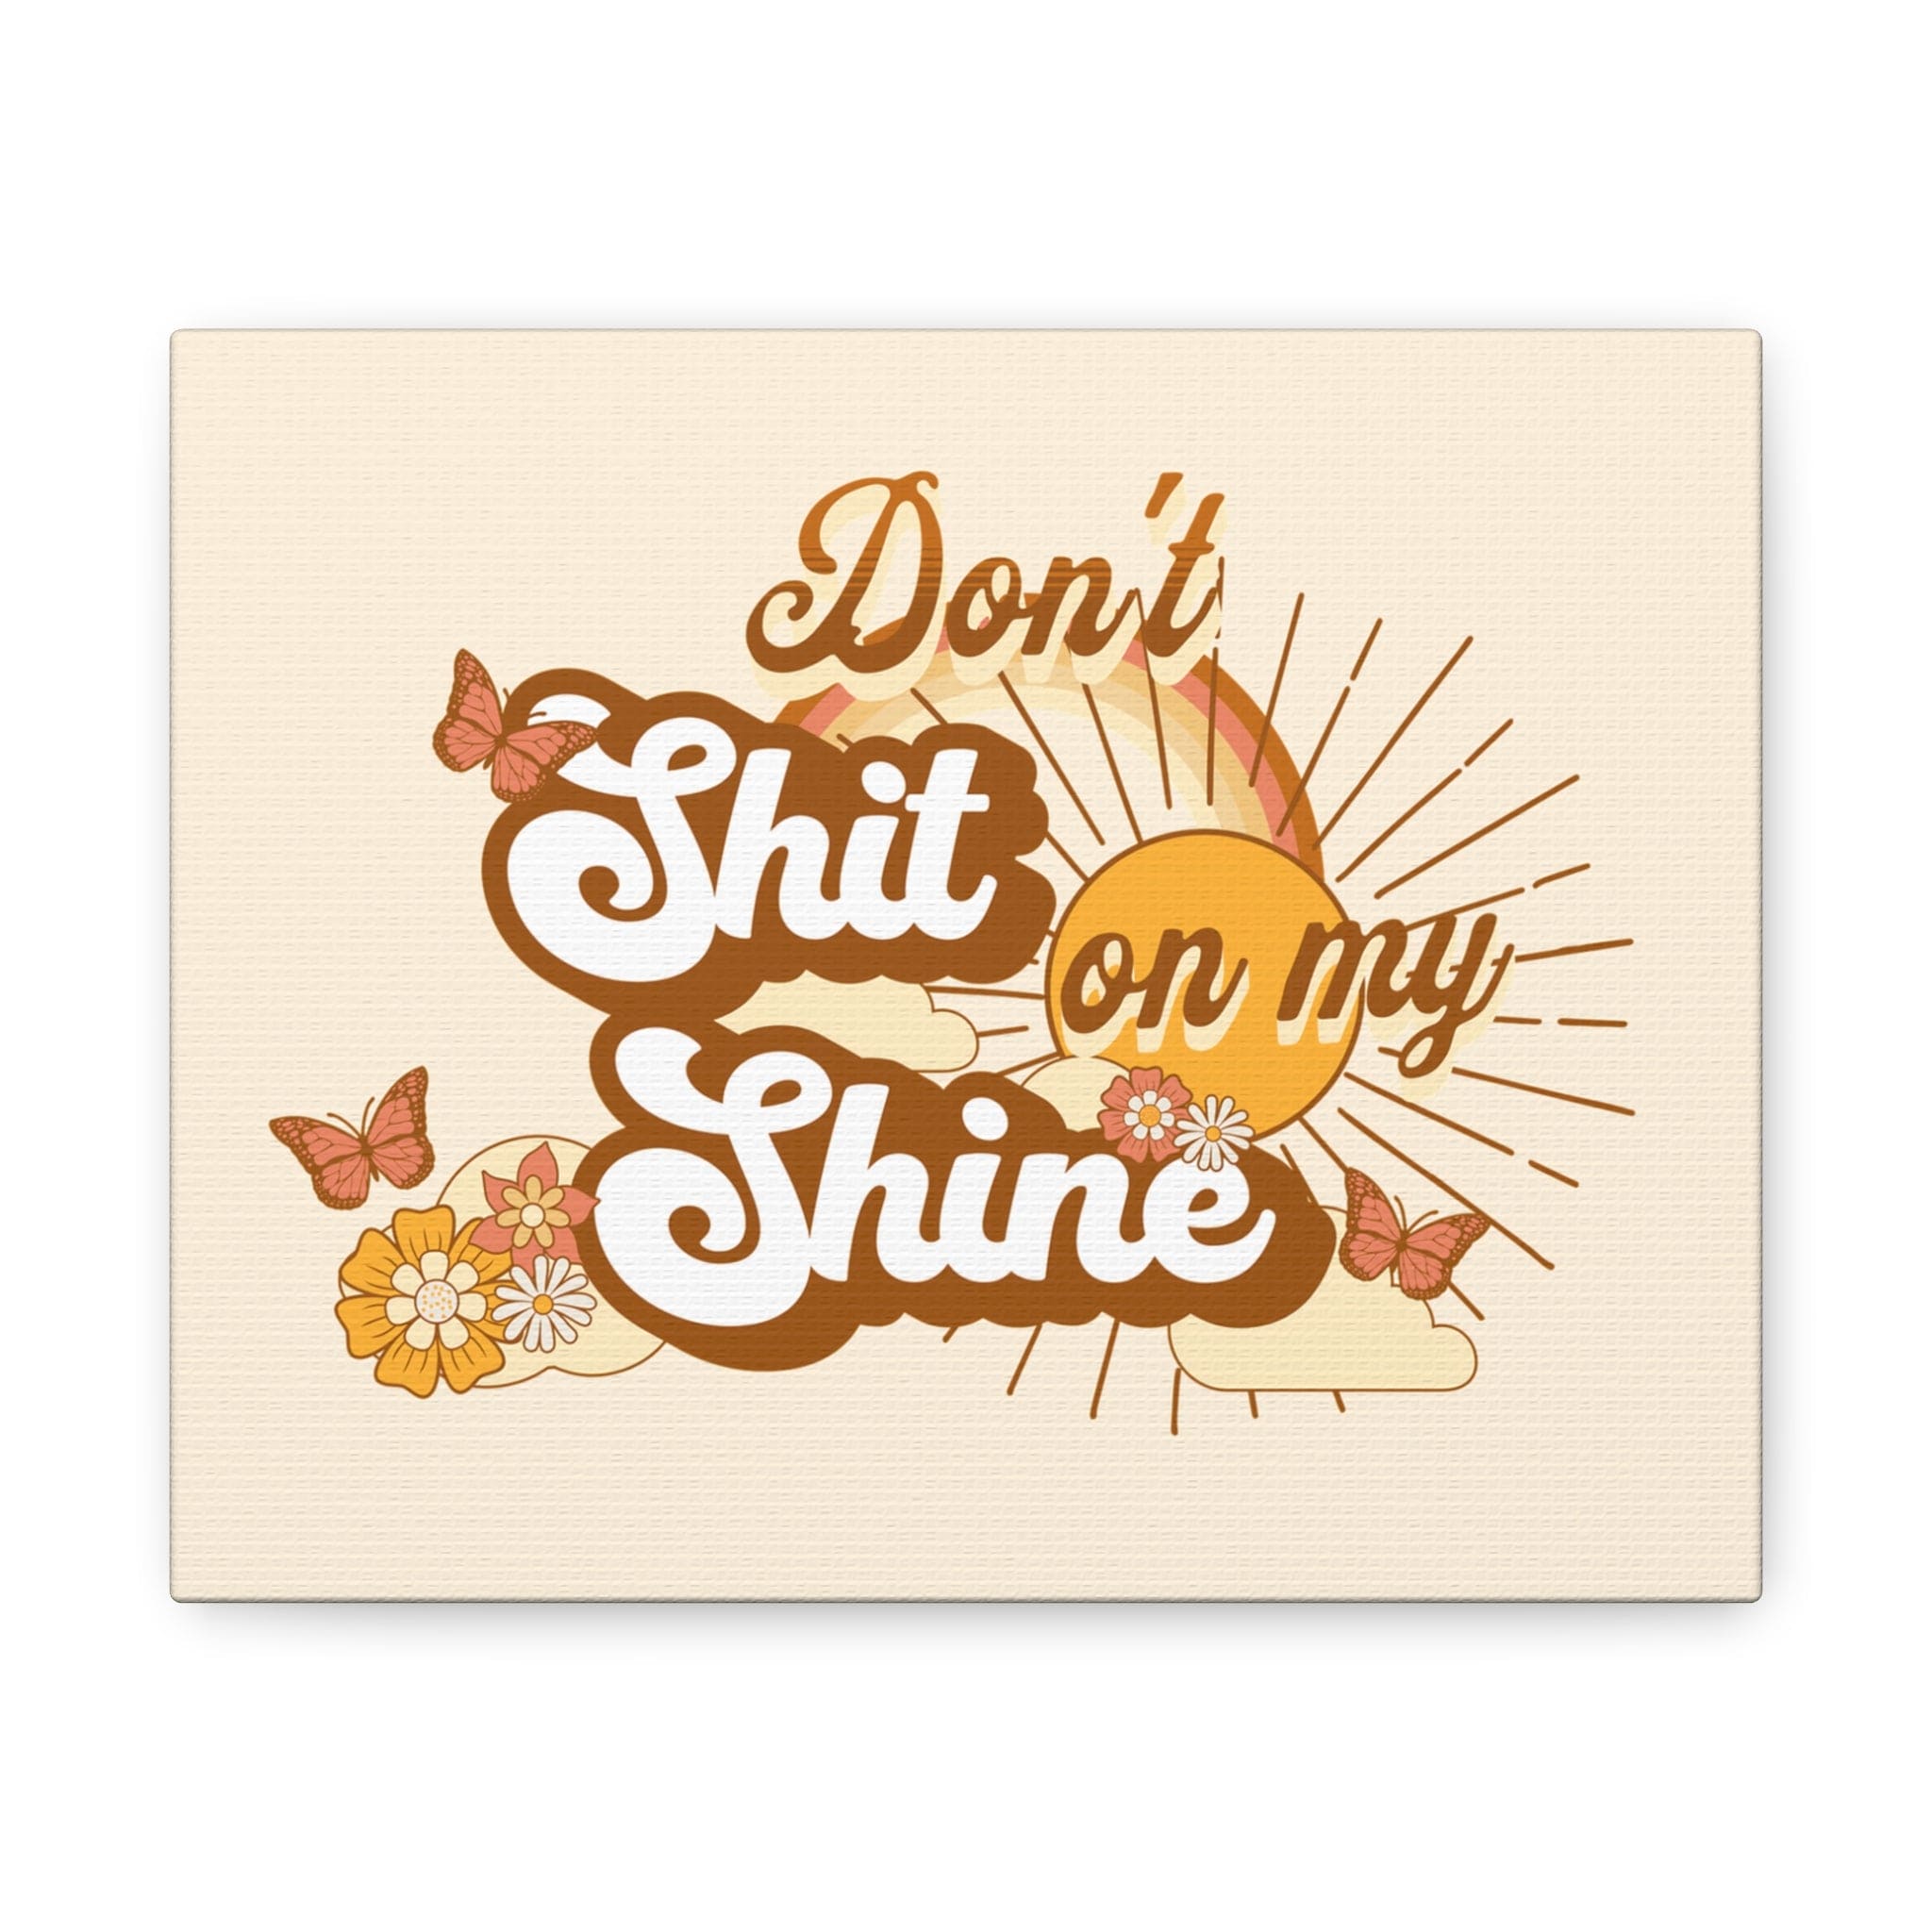 Don't Sh*t on my Shine - Canvas Gallery Wraps